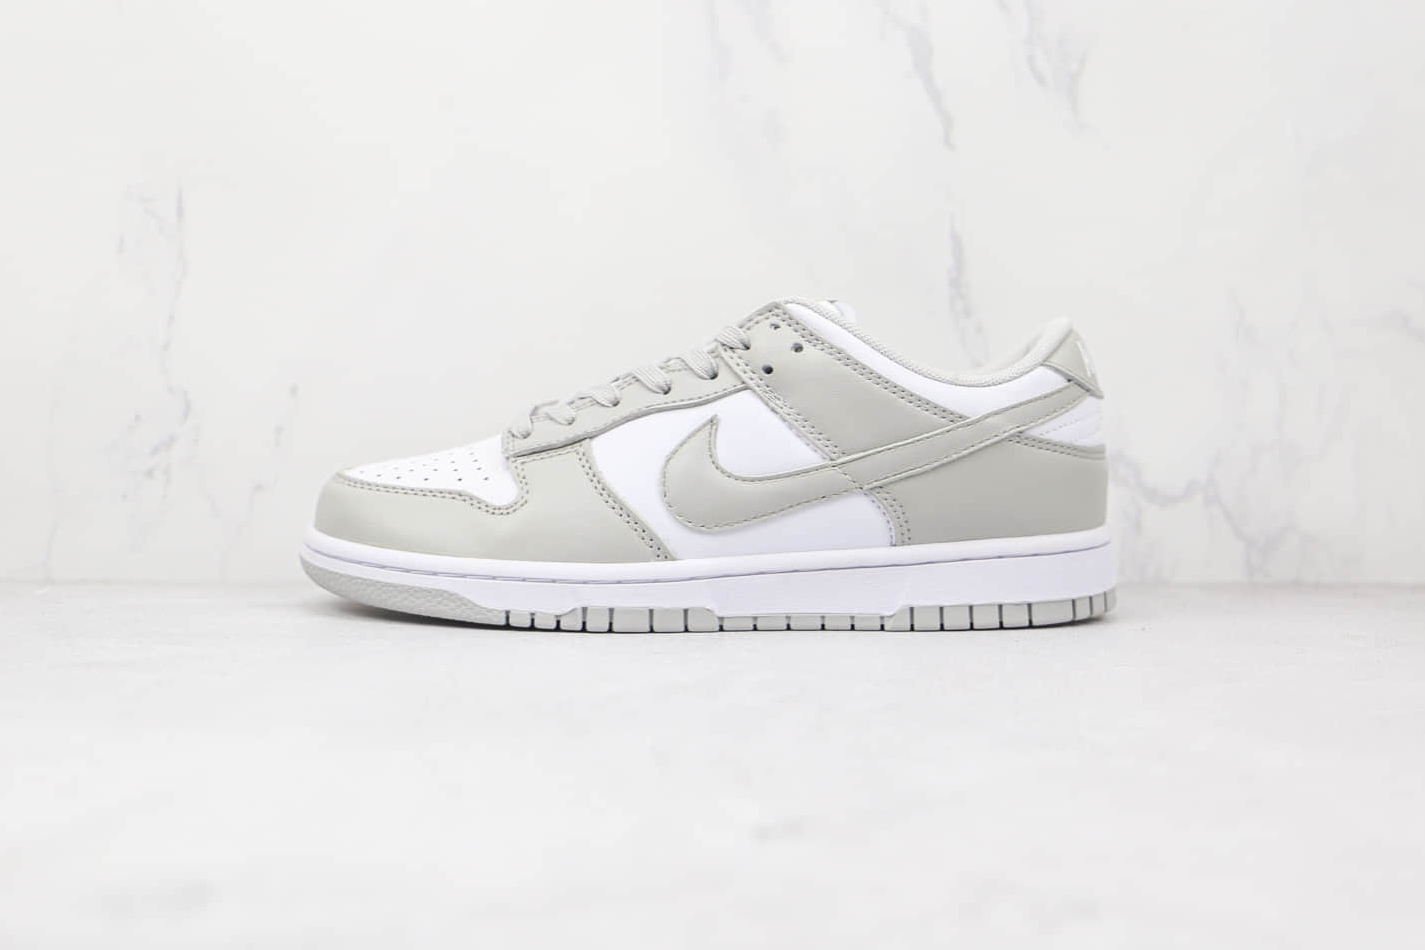 Nike Dunk Low 'Grey Fog' DD1391-103 | Shop the Latest Nike Dunk Low - Limited Stock | Get Yours Today | Free Shipping!